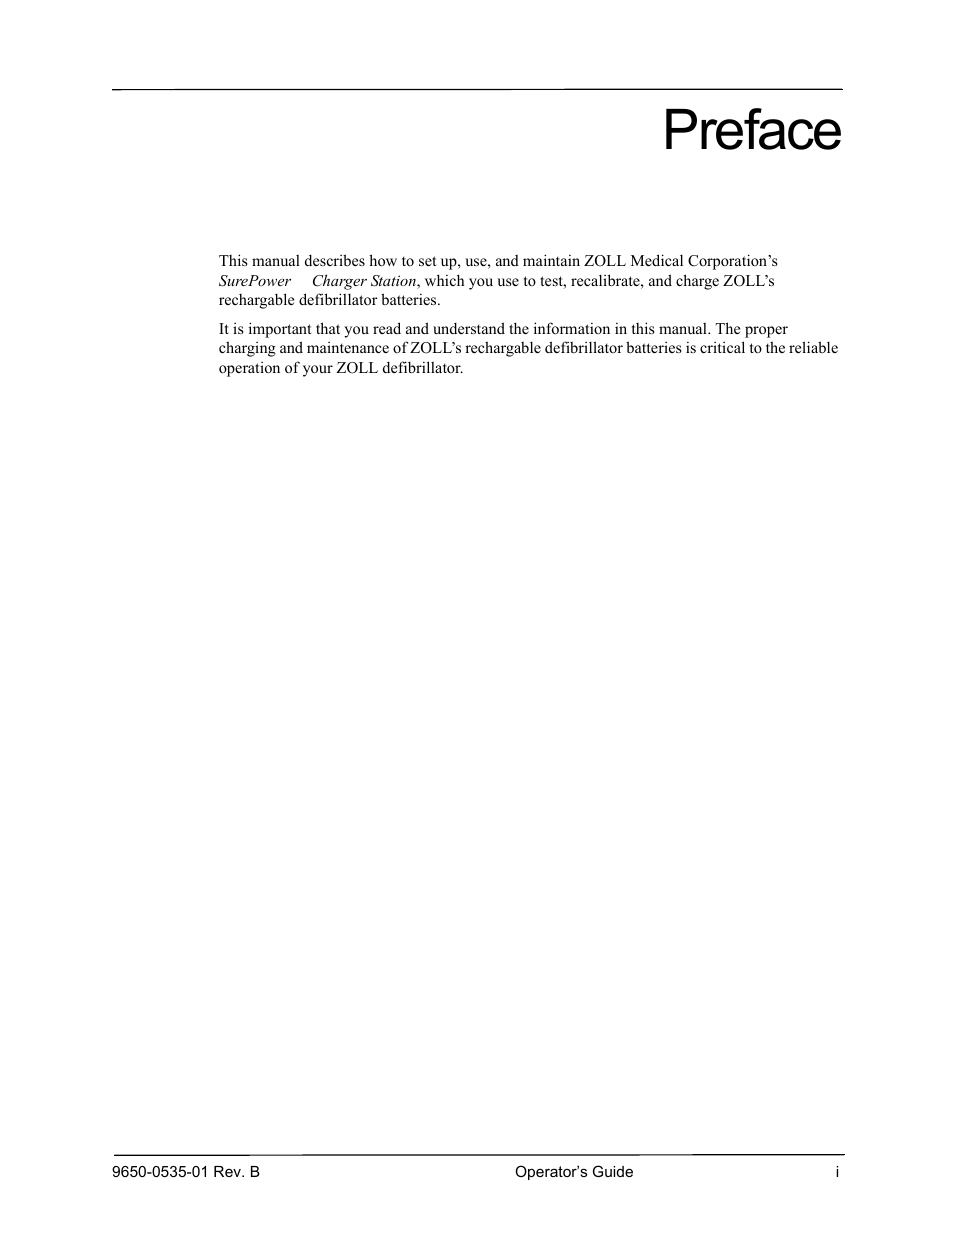 Preface | ZOLL SurePower Rev B Charger Station User Manual | Page 5 / 44